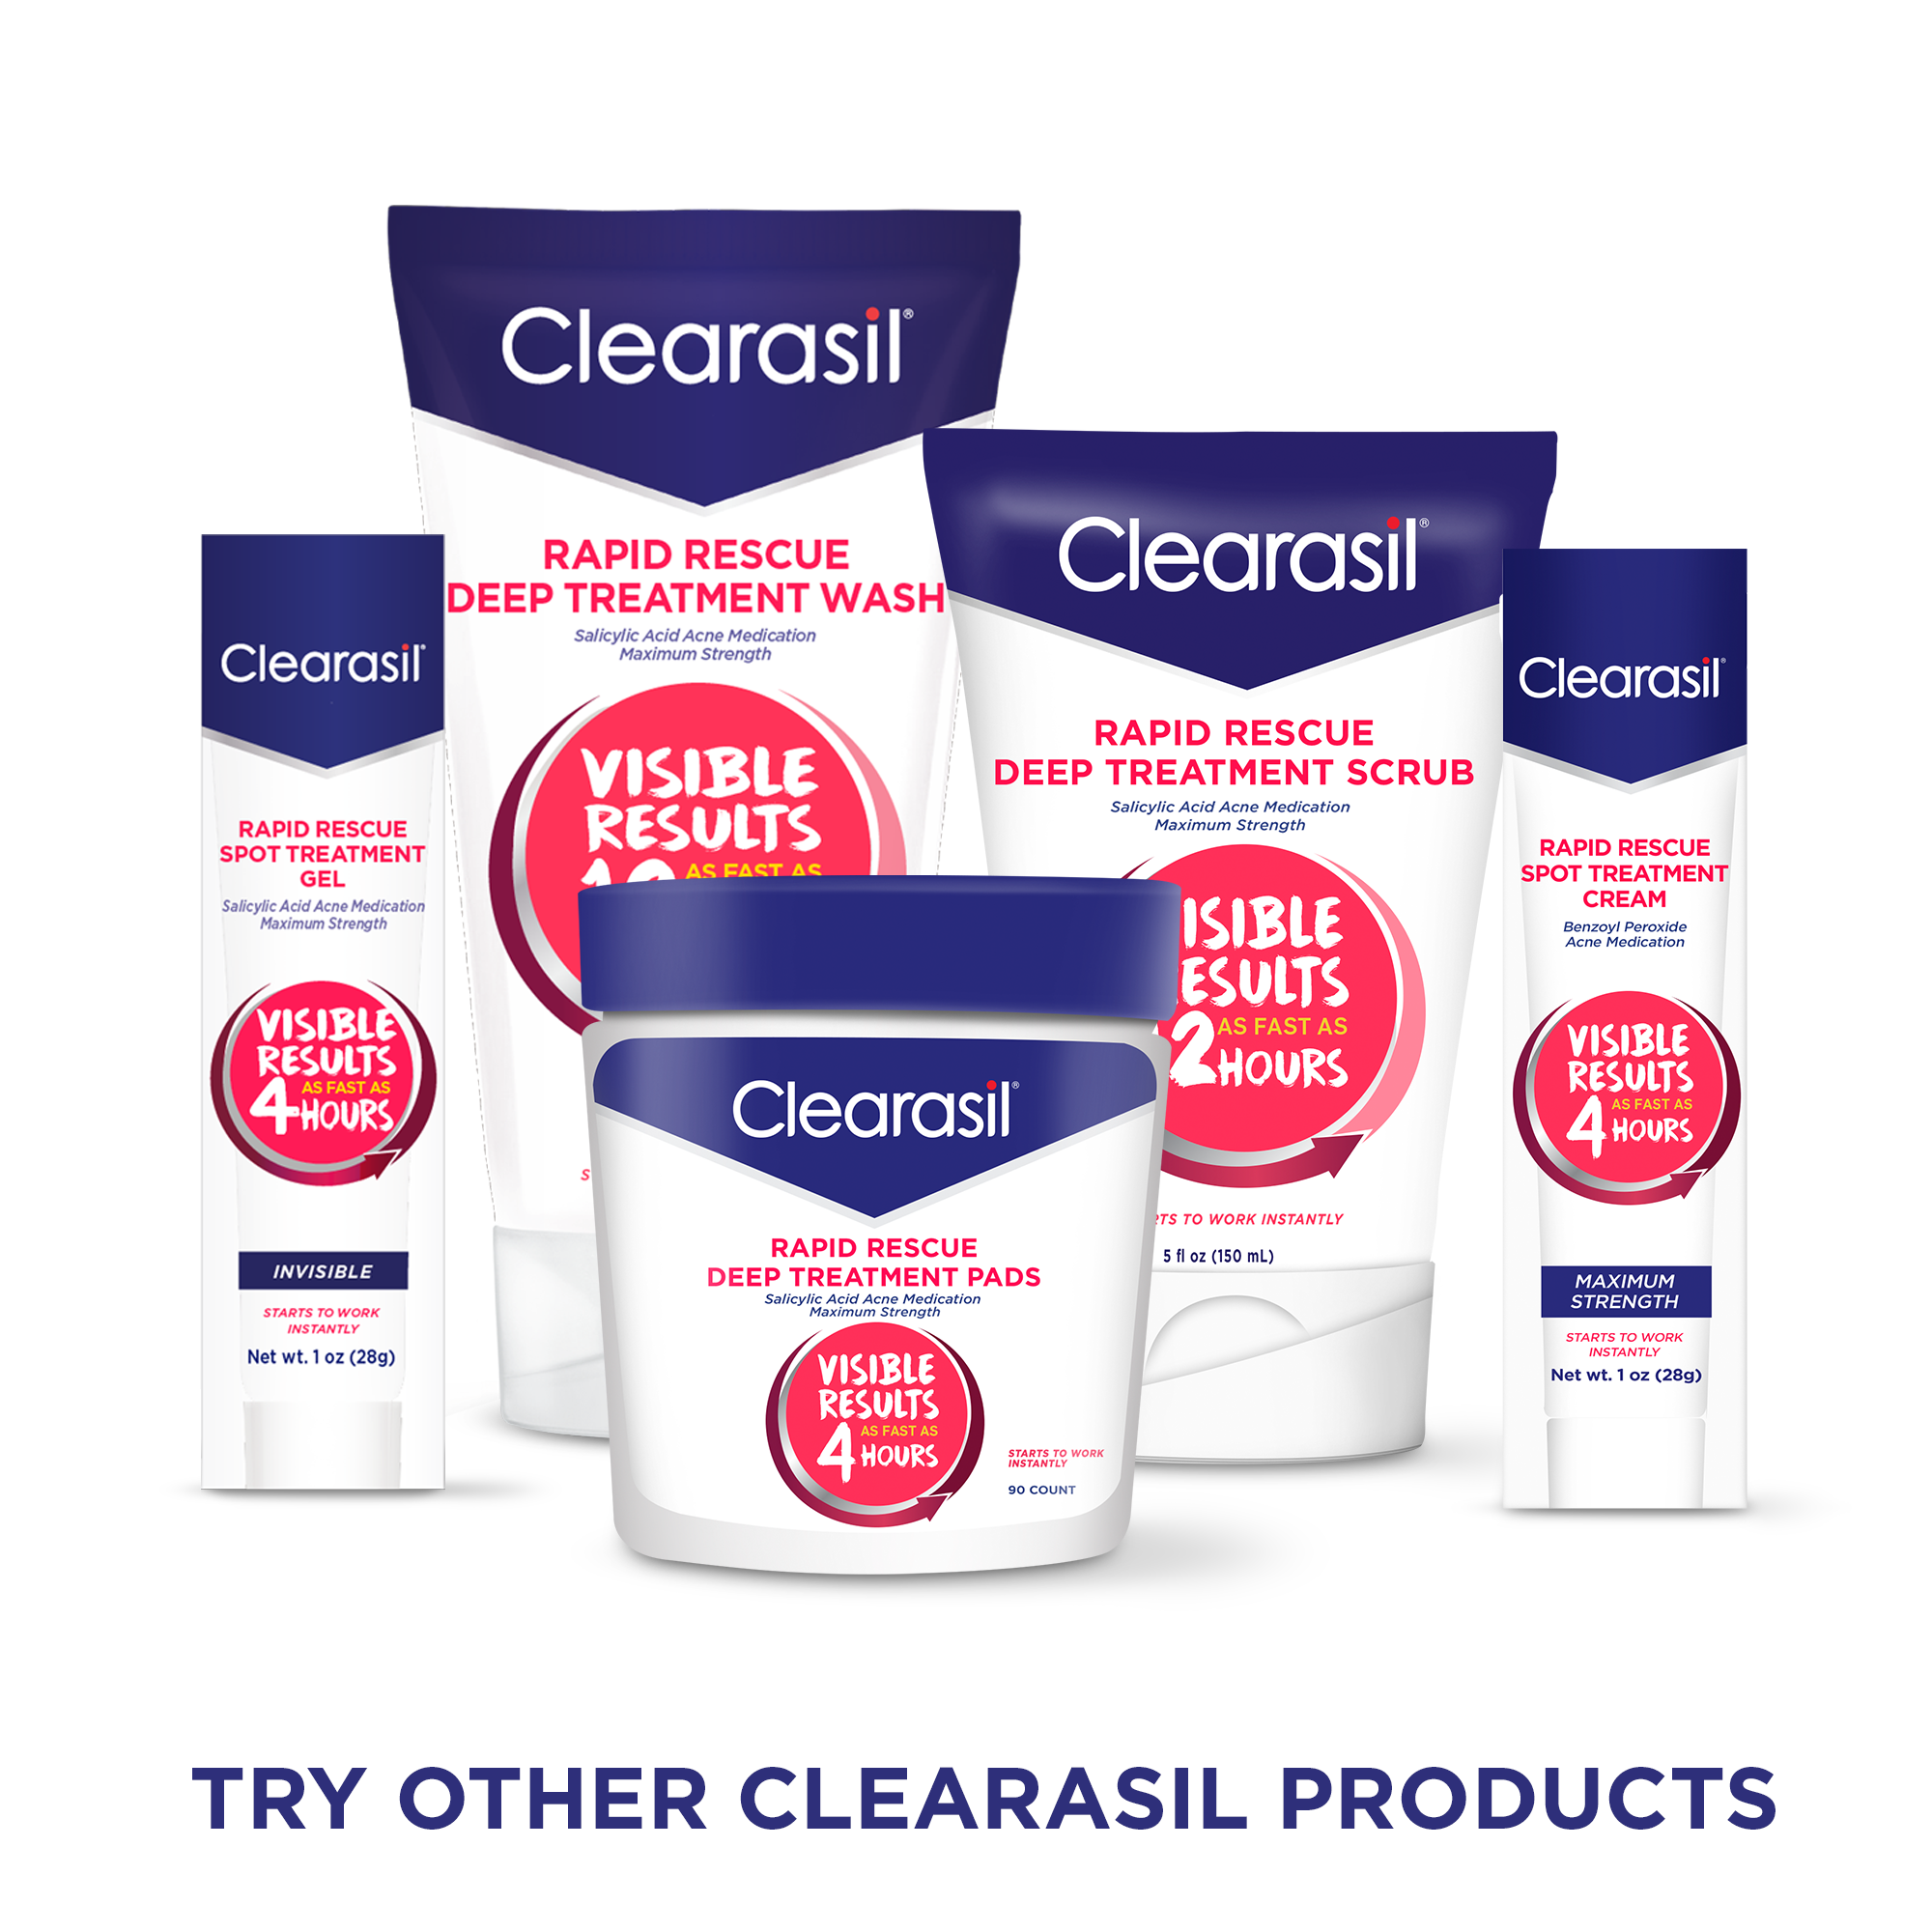 Clearasil Stubborn Acne One Minute Face Mask, 6.78 oz - image 12 of 12